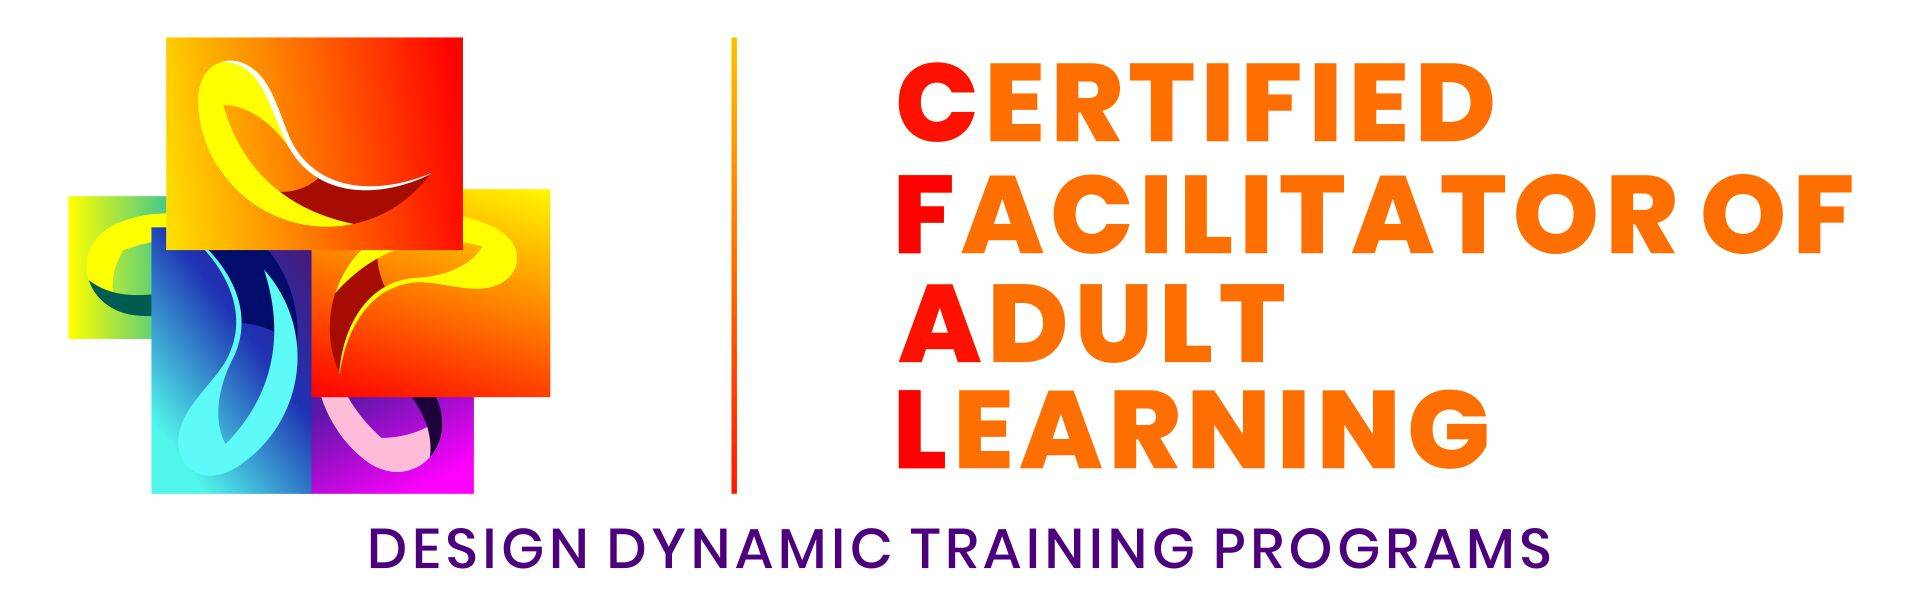 Certified Facilitator of Adult Learning logo